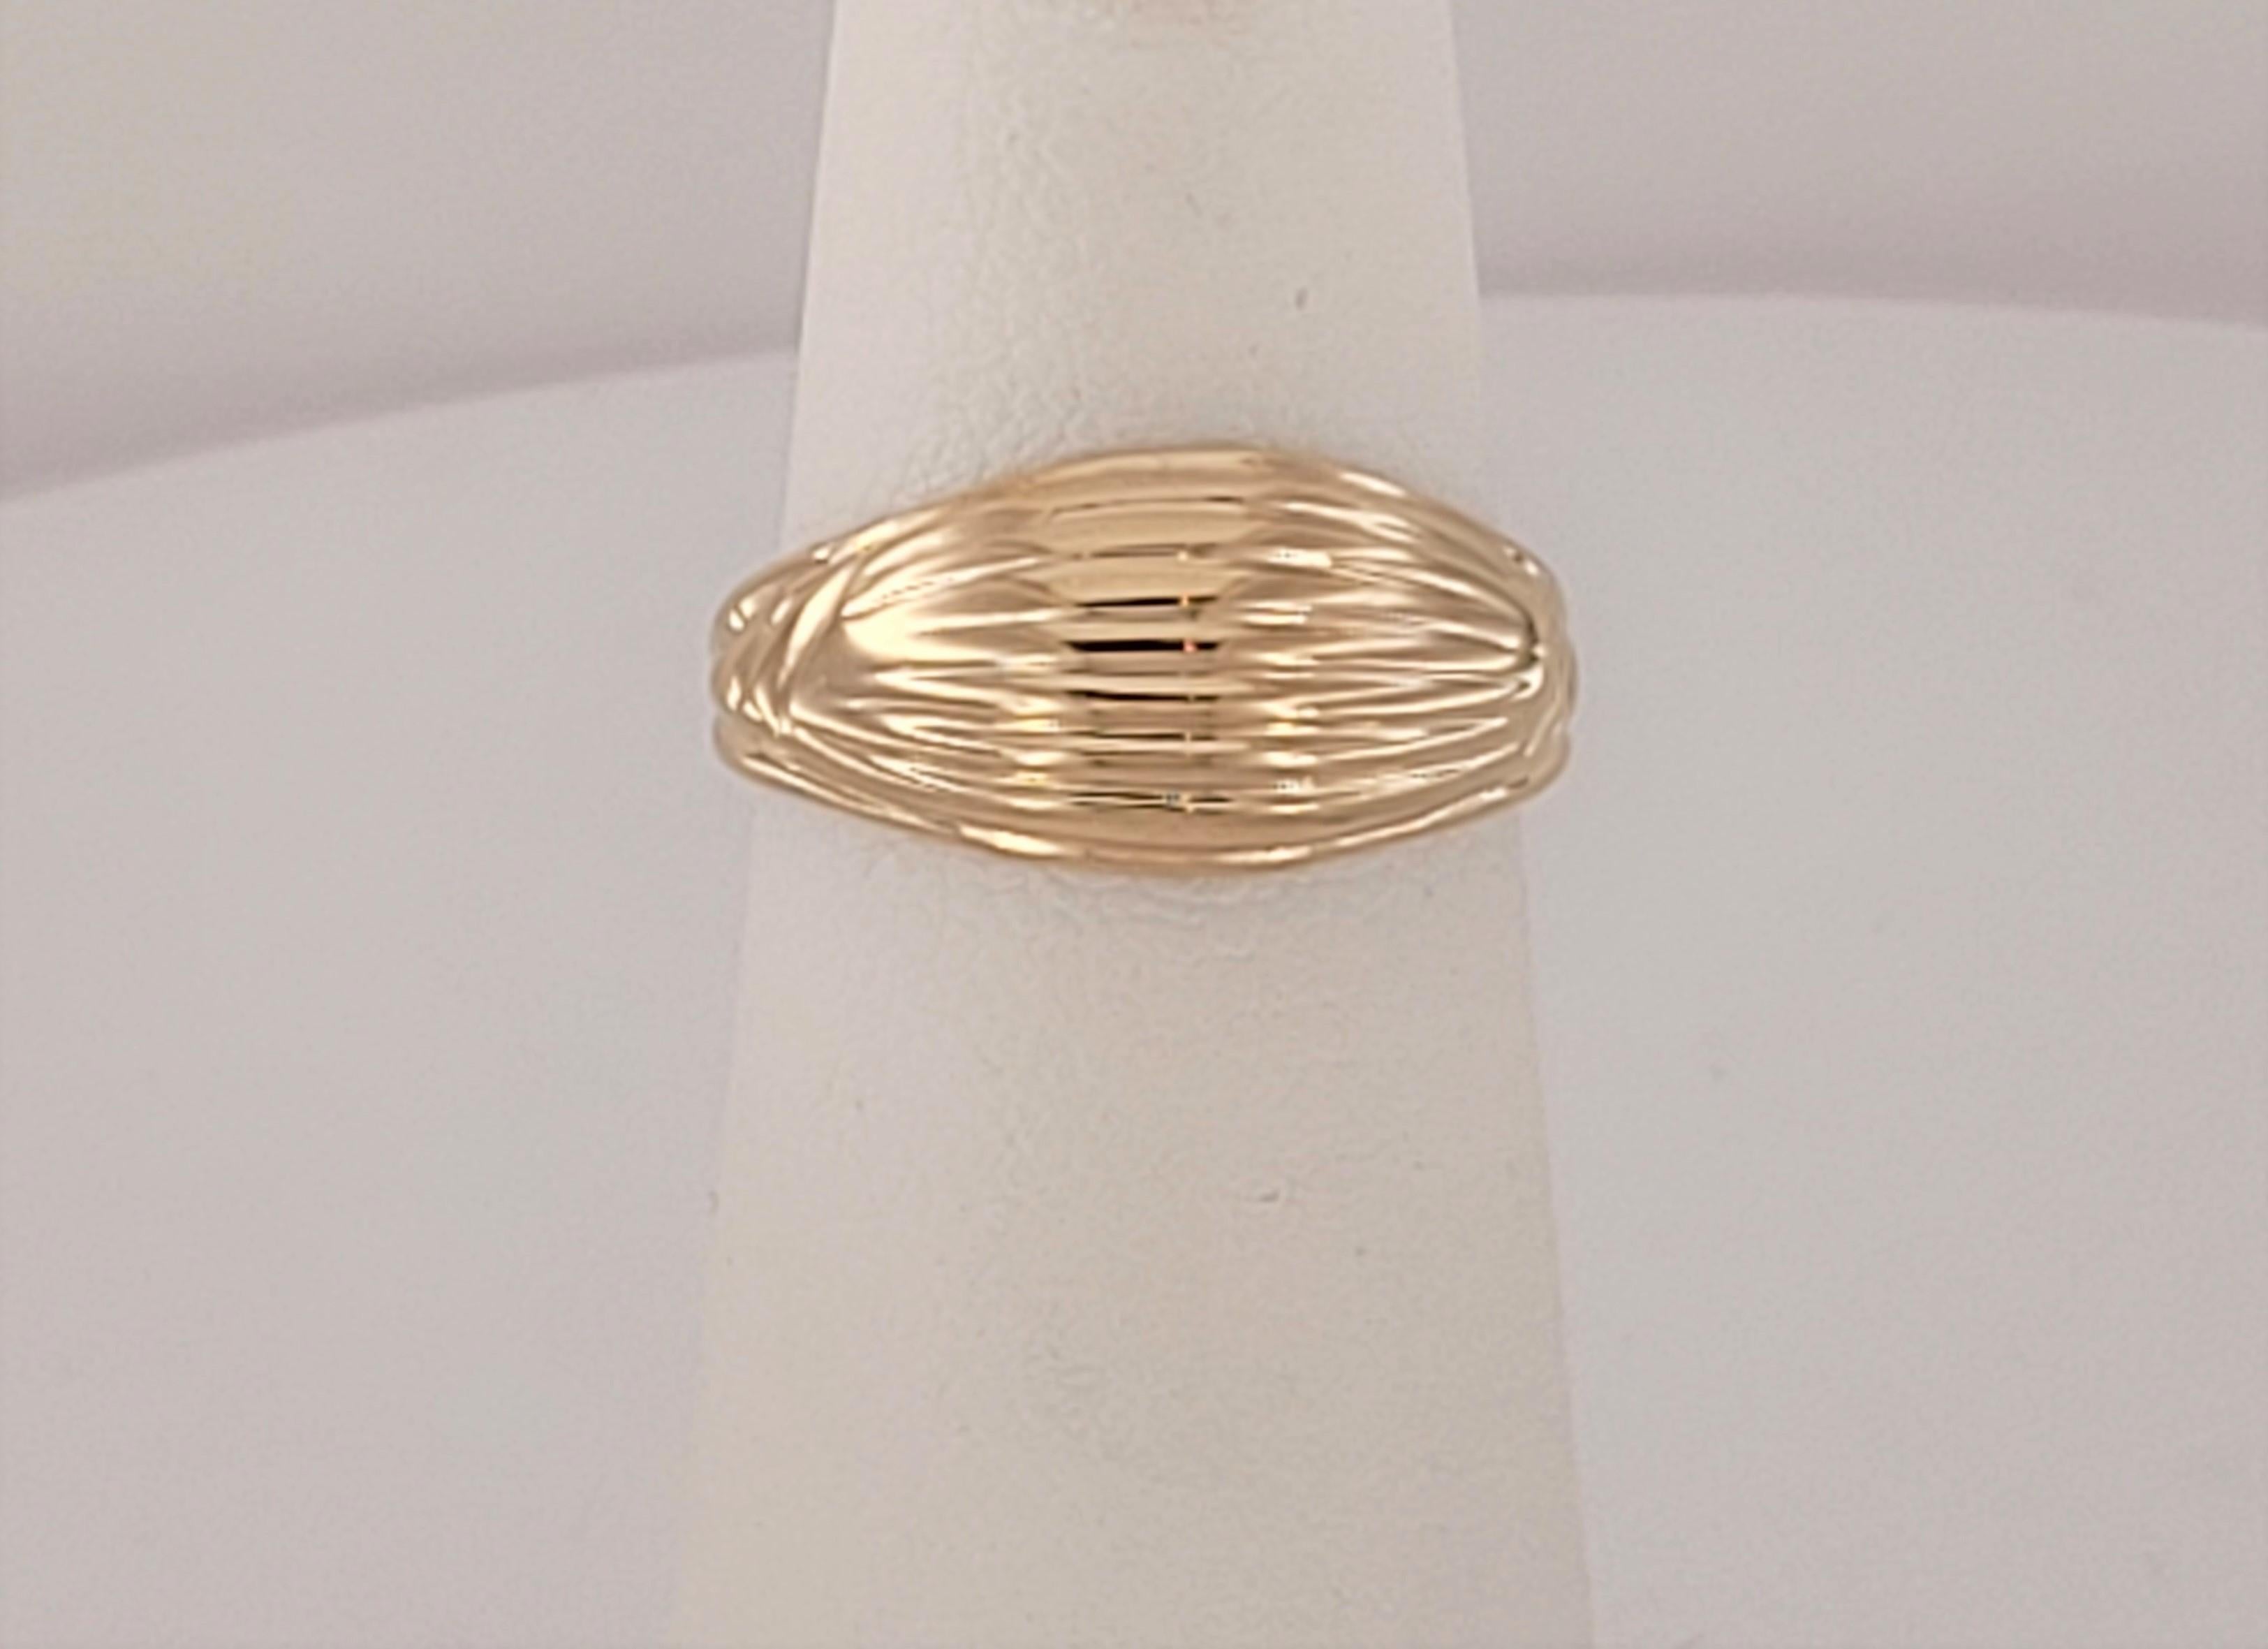 Brand  Tiffany & Co
14K yellow Gold
Ring Size 3.5
Ring Color Yellow
Ring Type Vintage 
Ring Weight 3gr
Ring is between 40-50 years old.